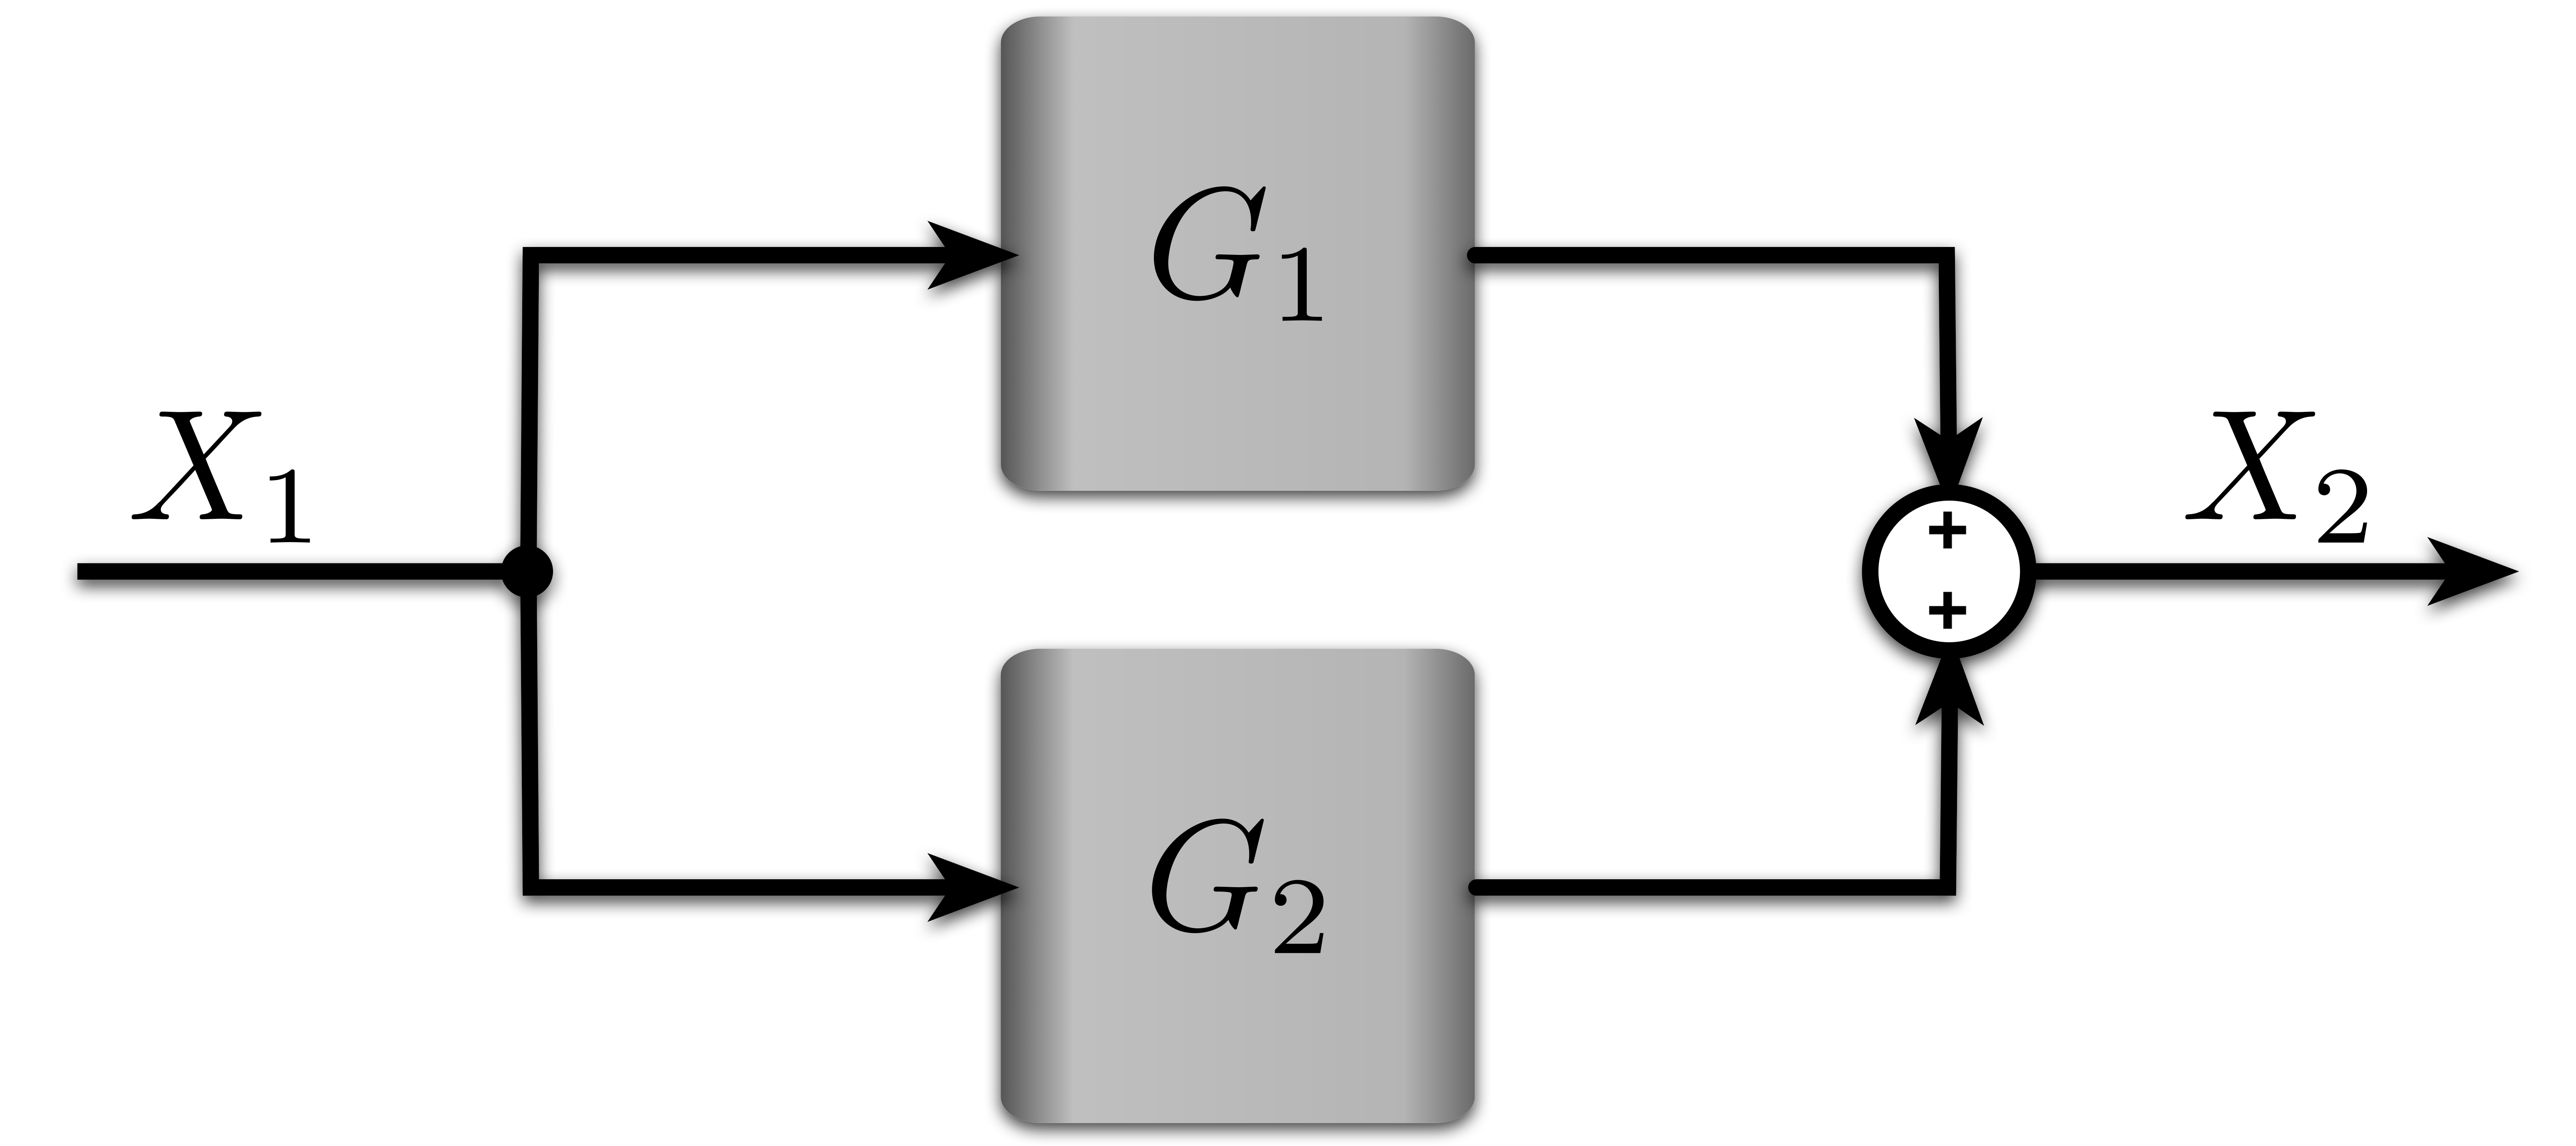 Block Diagram with a Parallel Connection